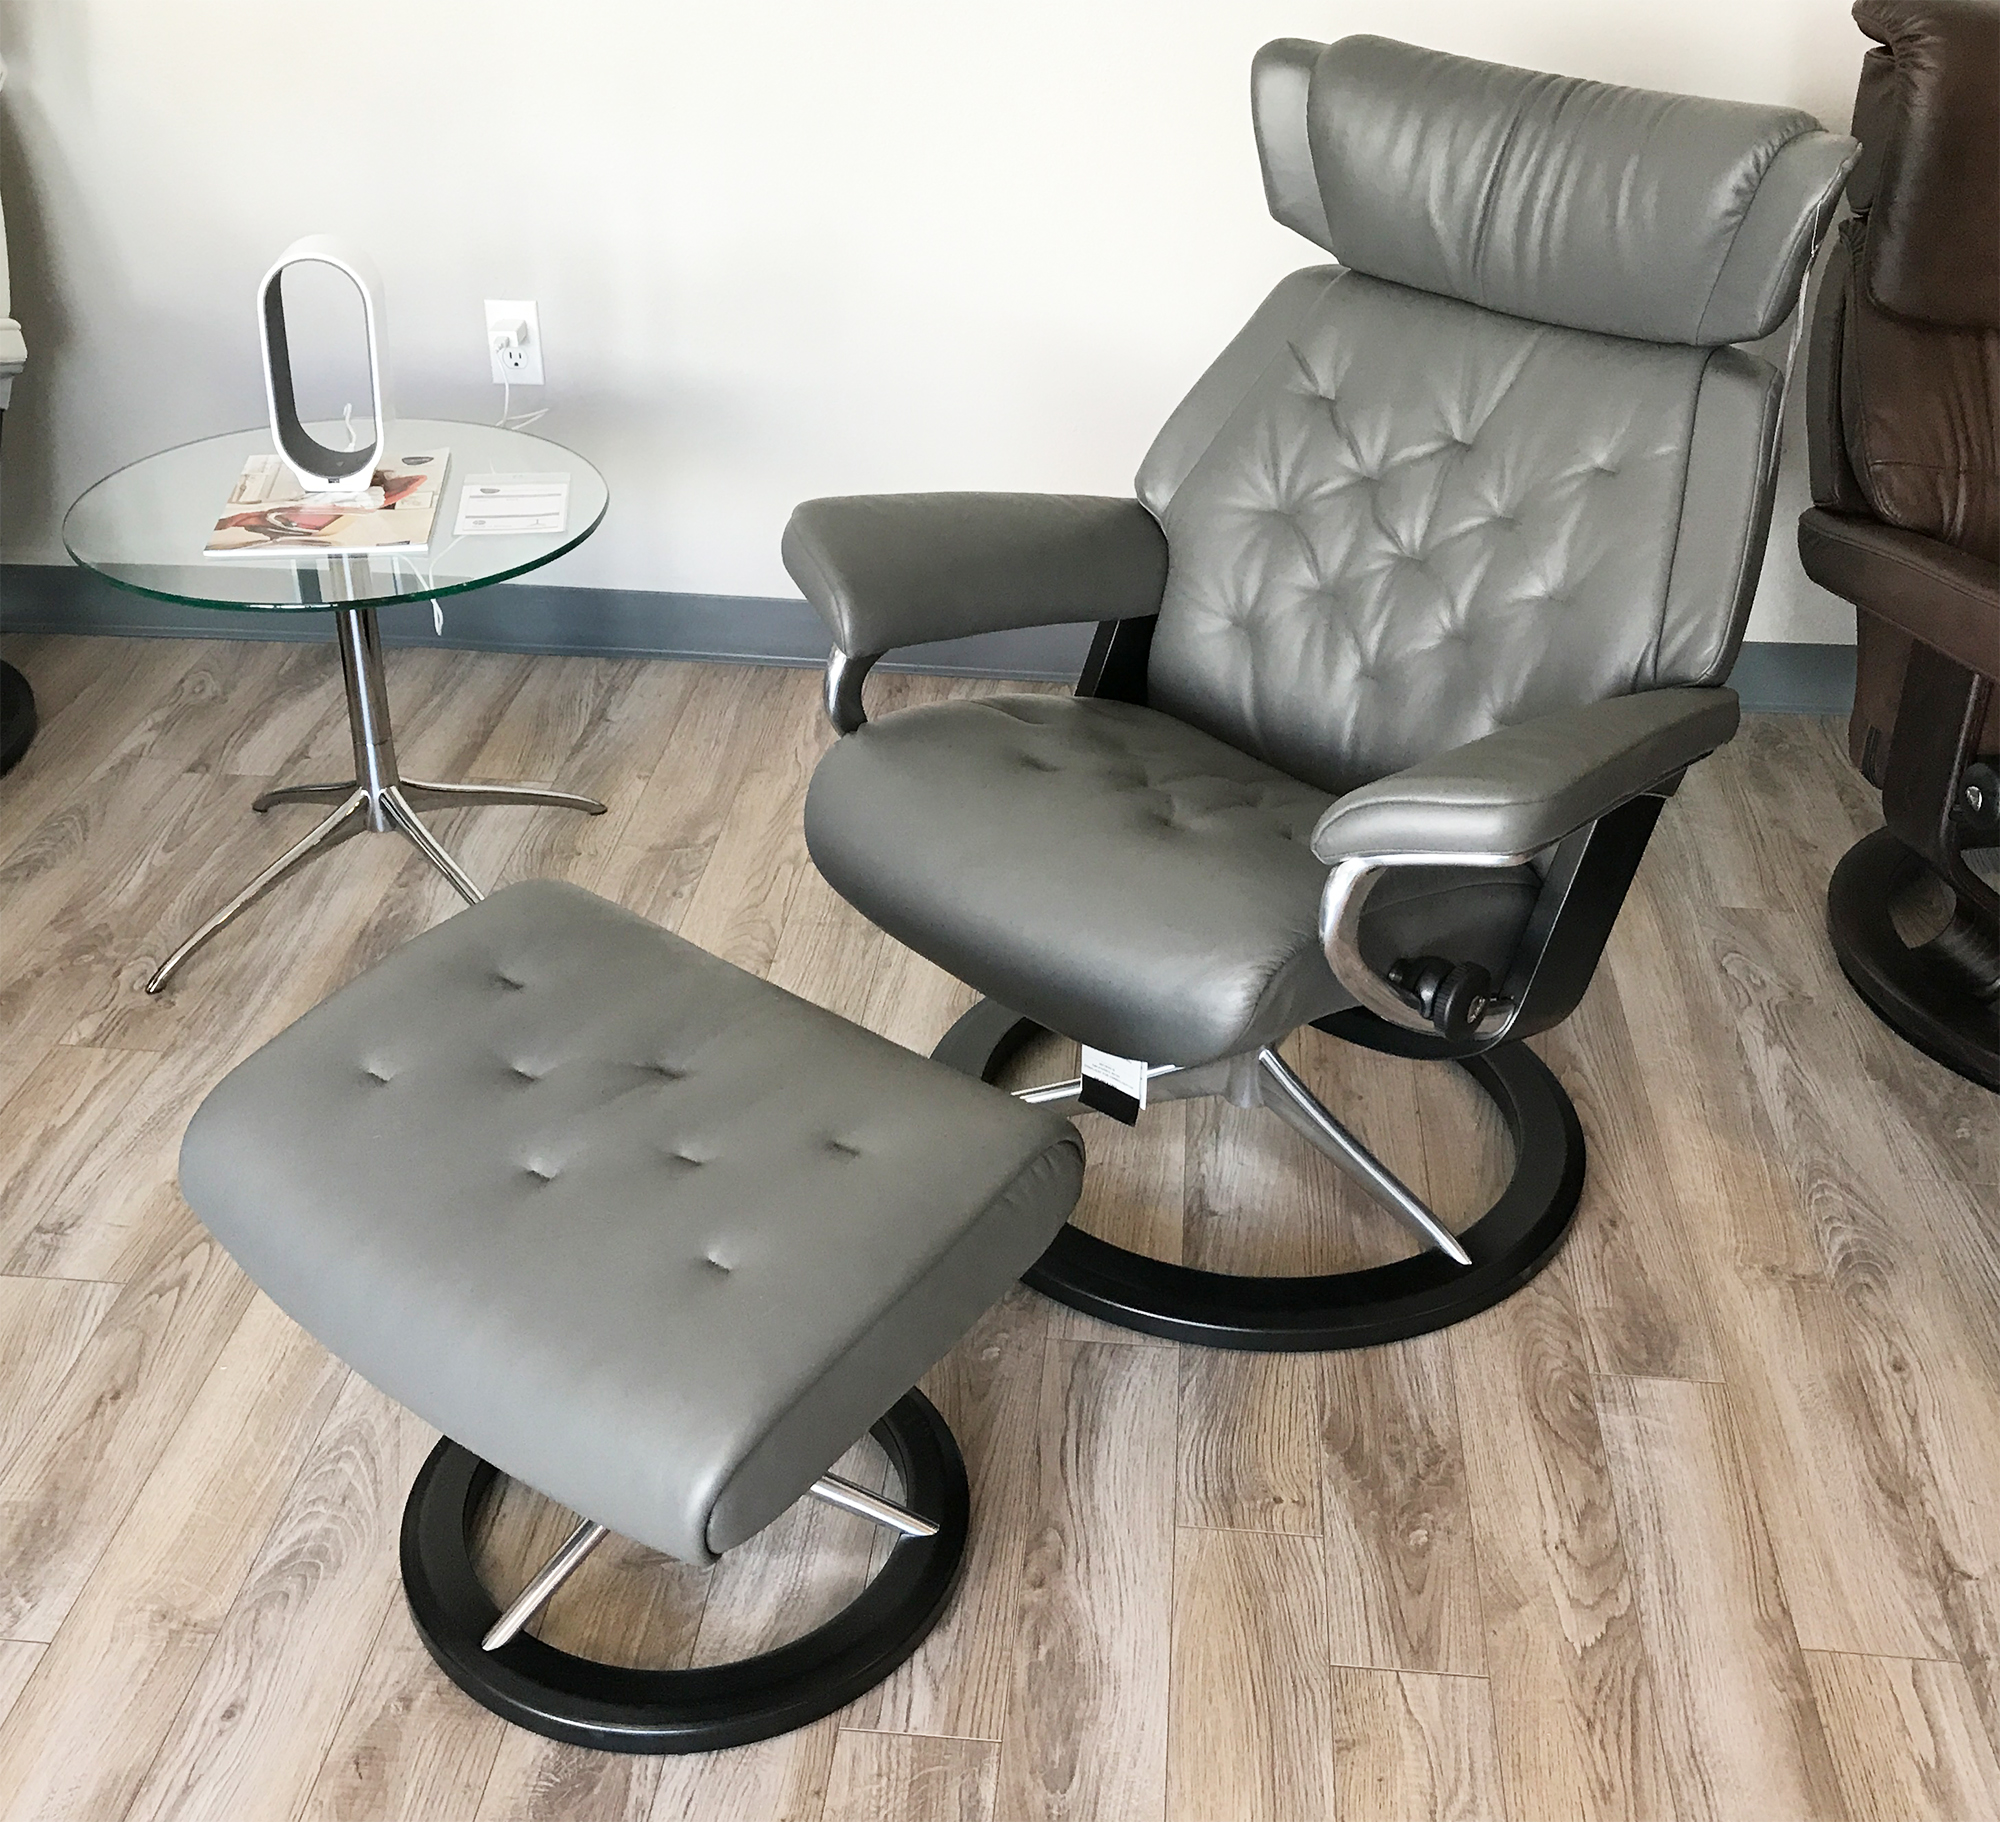 Leather Recliner Chair And Ottoman, Reclining Chair With Ottoman Leather